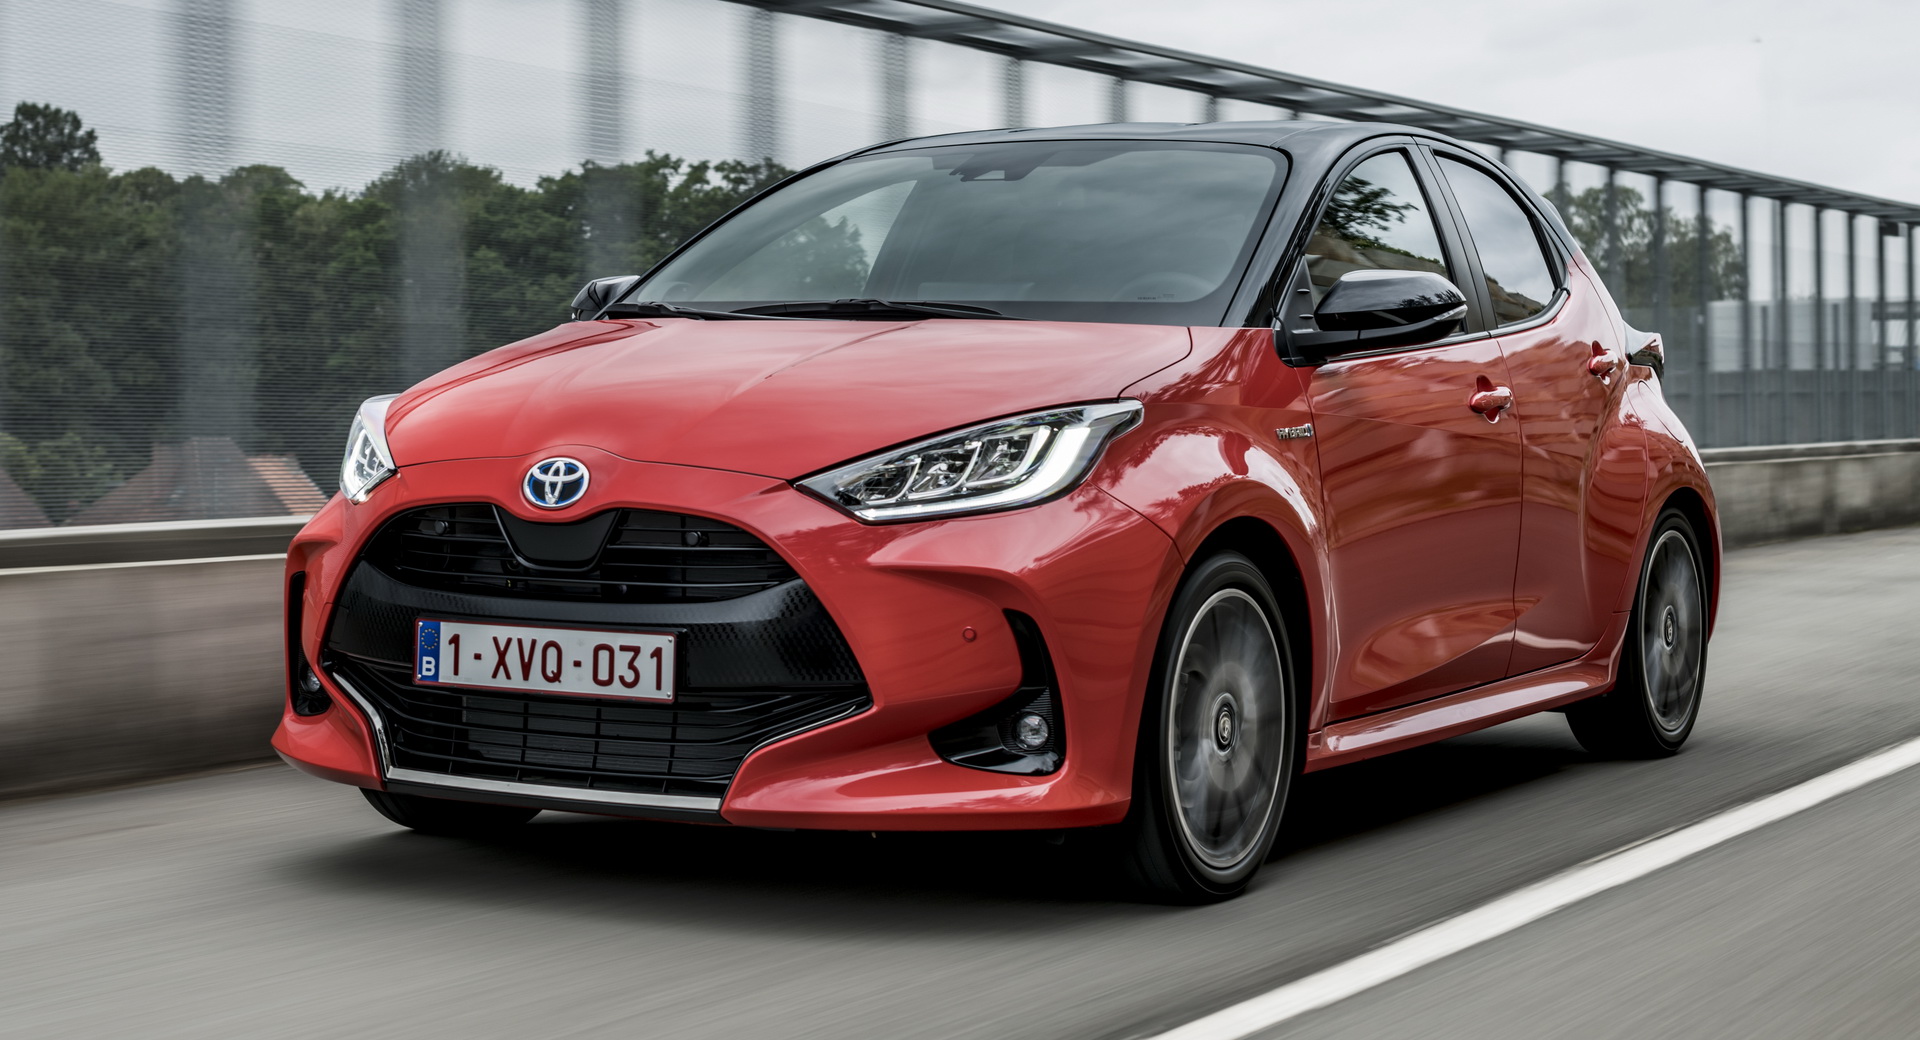 2020 Toyota Yaris Launched In Europe With New 114 Hp Hybrid Powertrain